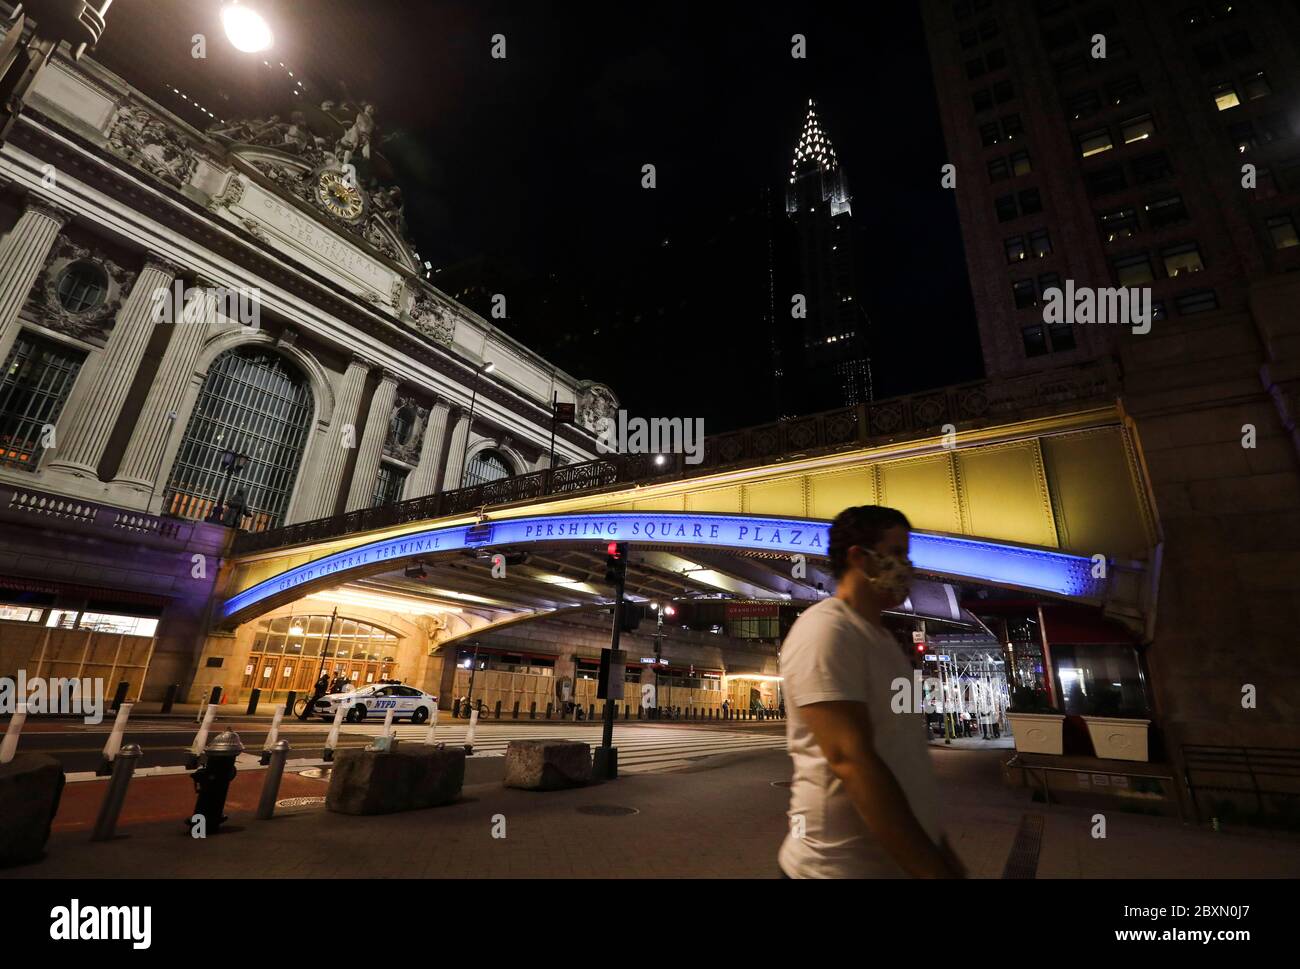 New York, USA. 7th June, 2020. Photo taken on June 7, 2020 shows the Grand Central Terminal Bridge lit in blue and gold in New York, the United States. New York Governor Andrew M. Cuomo on Sunday announced landmarks across the state would be lit in blue and gold and will project 'New York Tough' in honor of New Yorkers' work to flatten the curve of the COVID-19 virus. The worst-hit New York City will enter phase one of reopening on Monday. Credit: Wang Ying/Xinhua/Alamy Live News Stock Photo